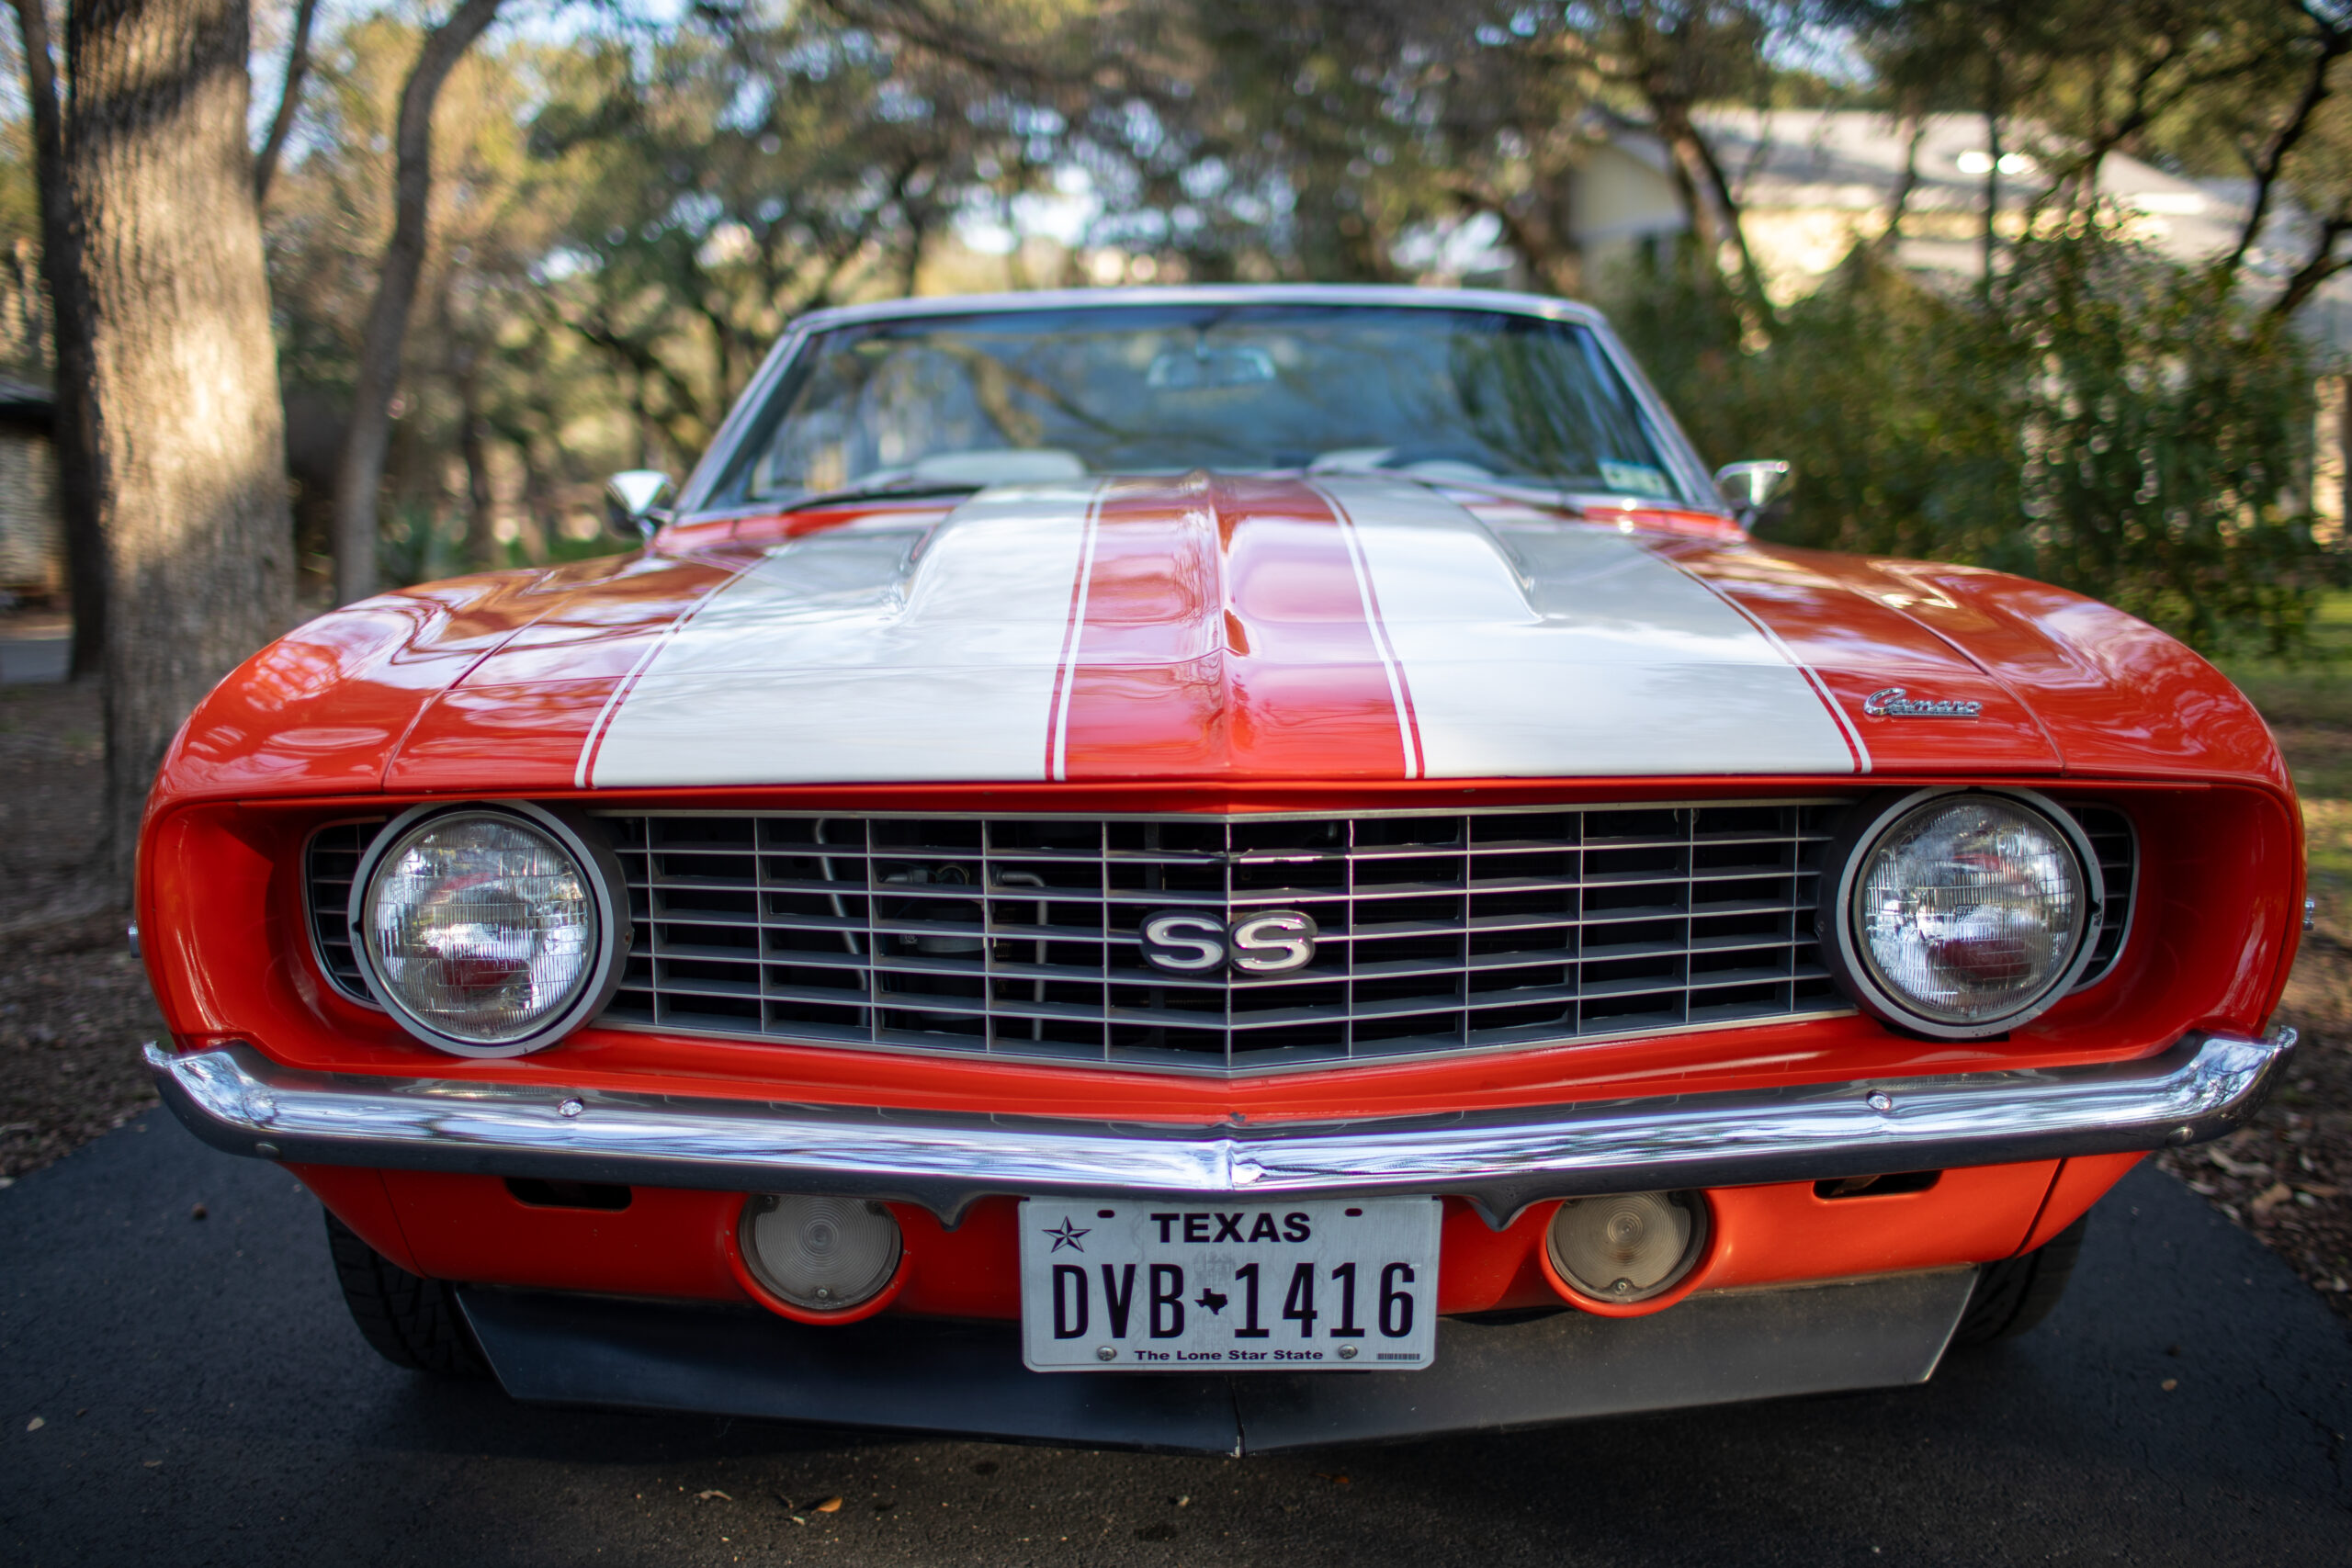 Front view of a vintage red Chevrolet Camaro with white racing stripes, parked on a driveway. Texas license plate "DVB-1416". Trees and sunlight in the background.